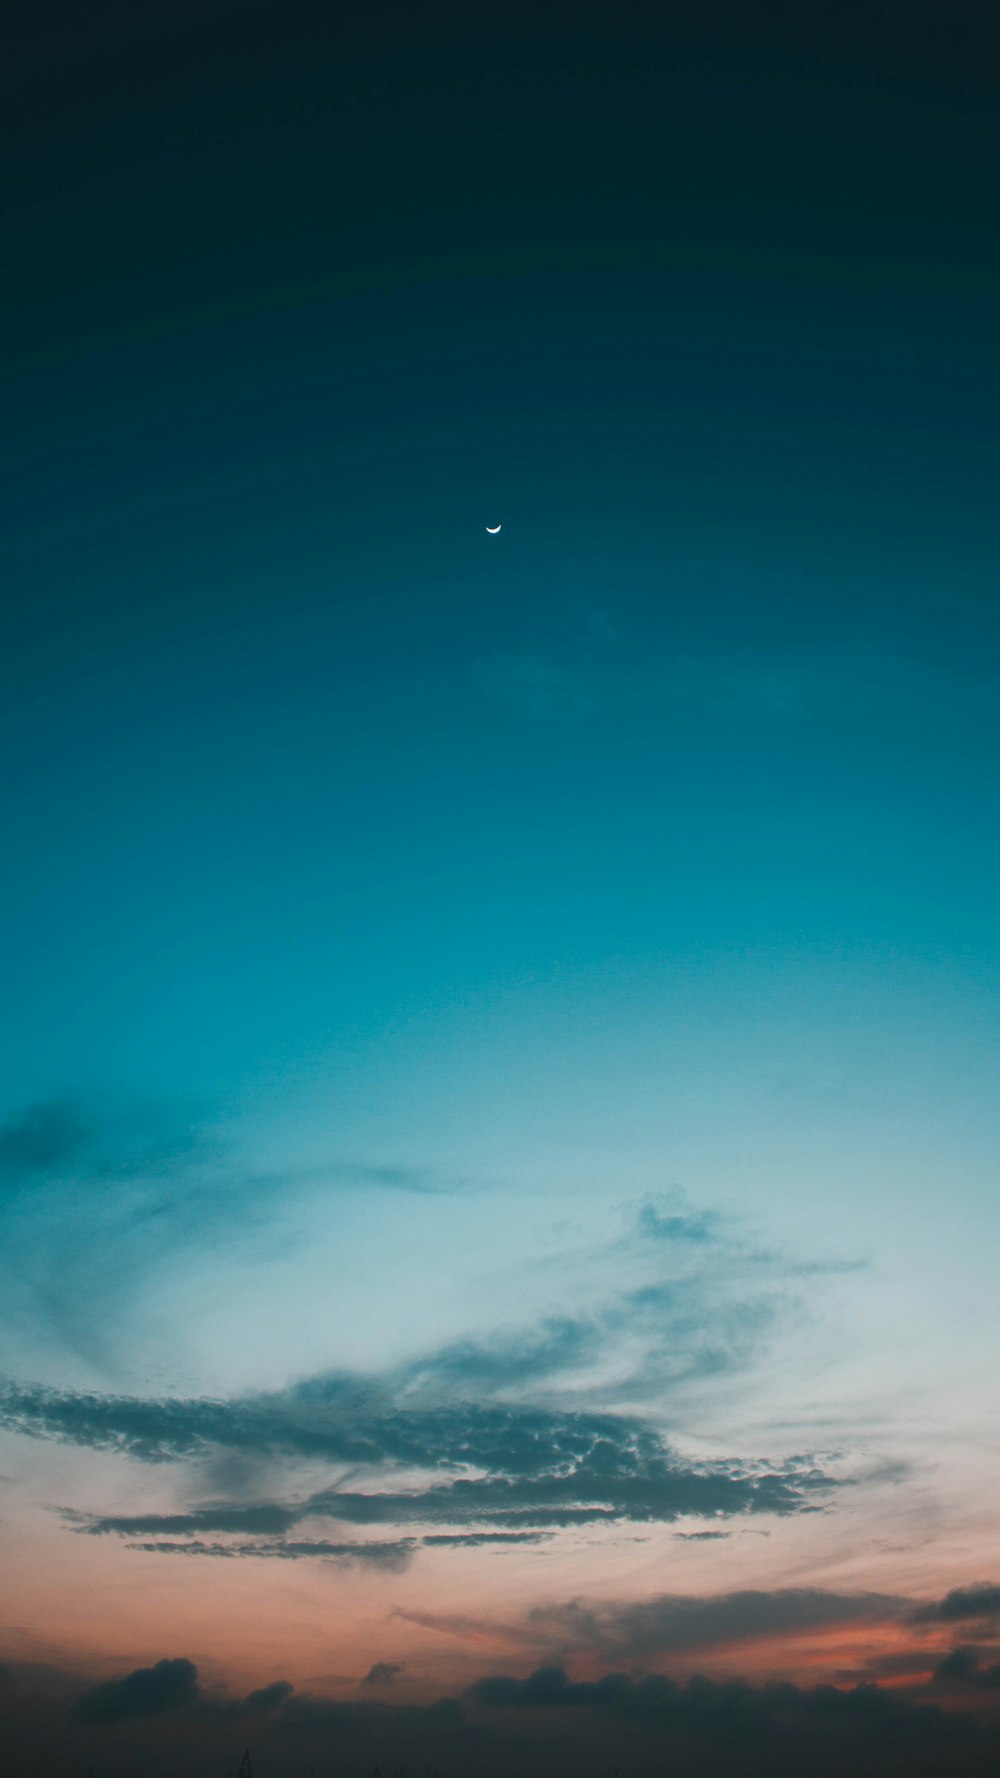 550+ Aesthetic Sky Pictures | Download Free Images on Unsplash